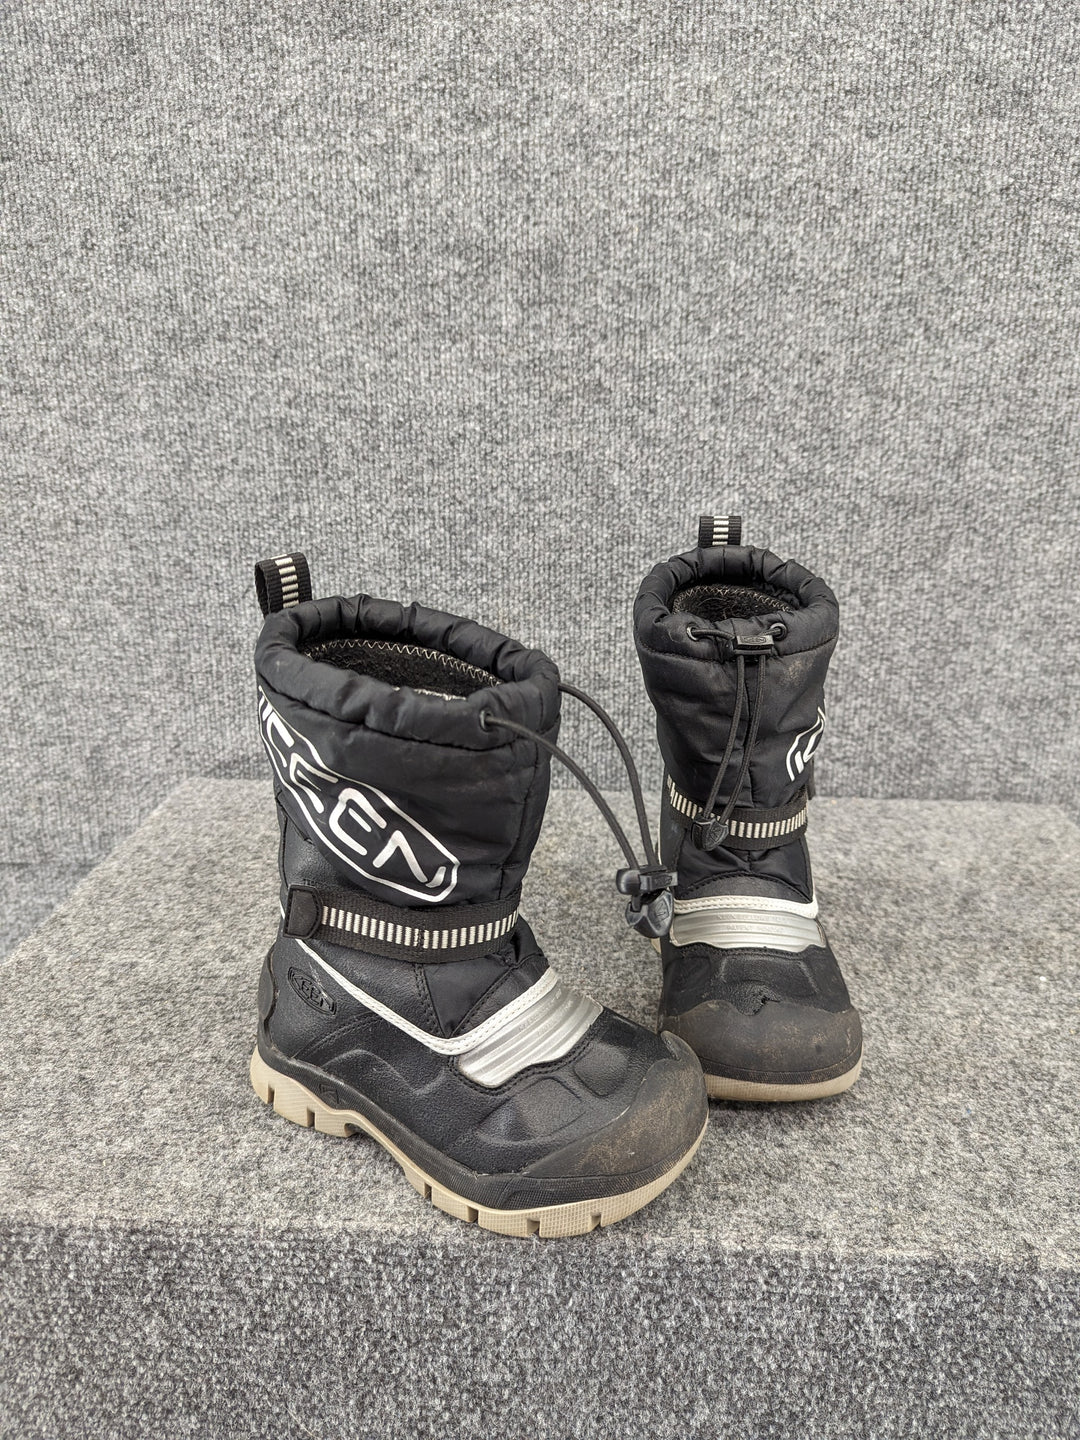 Size Y9/25 Youth Winter Boots